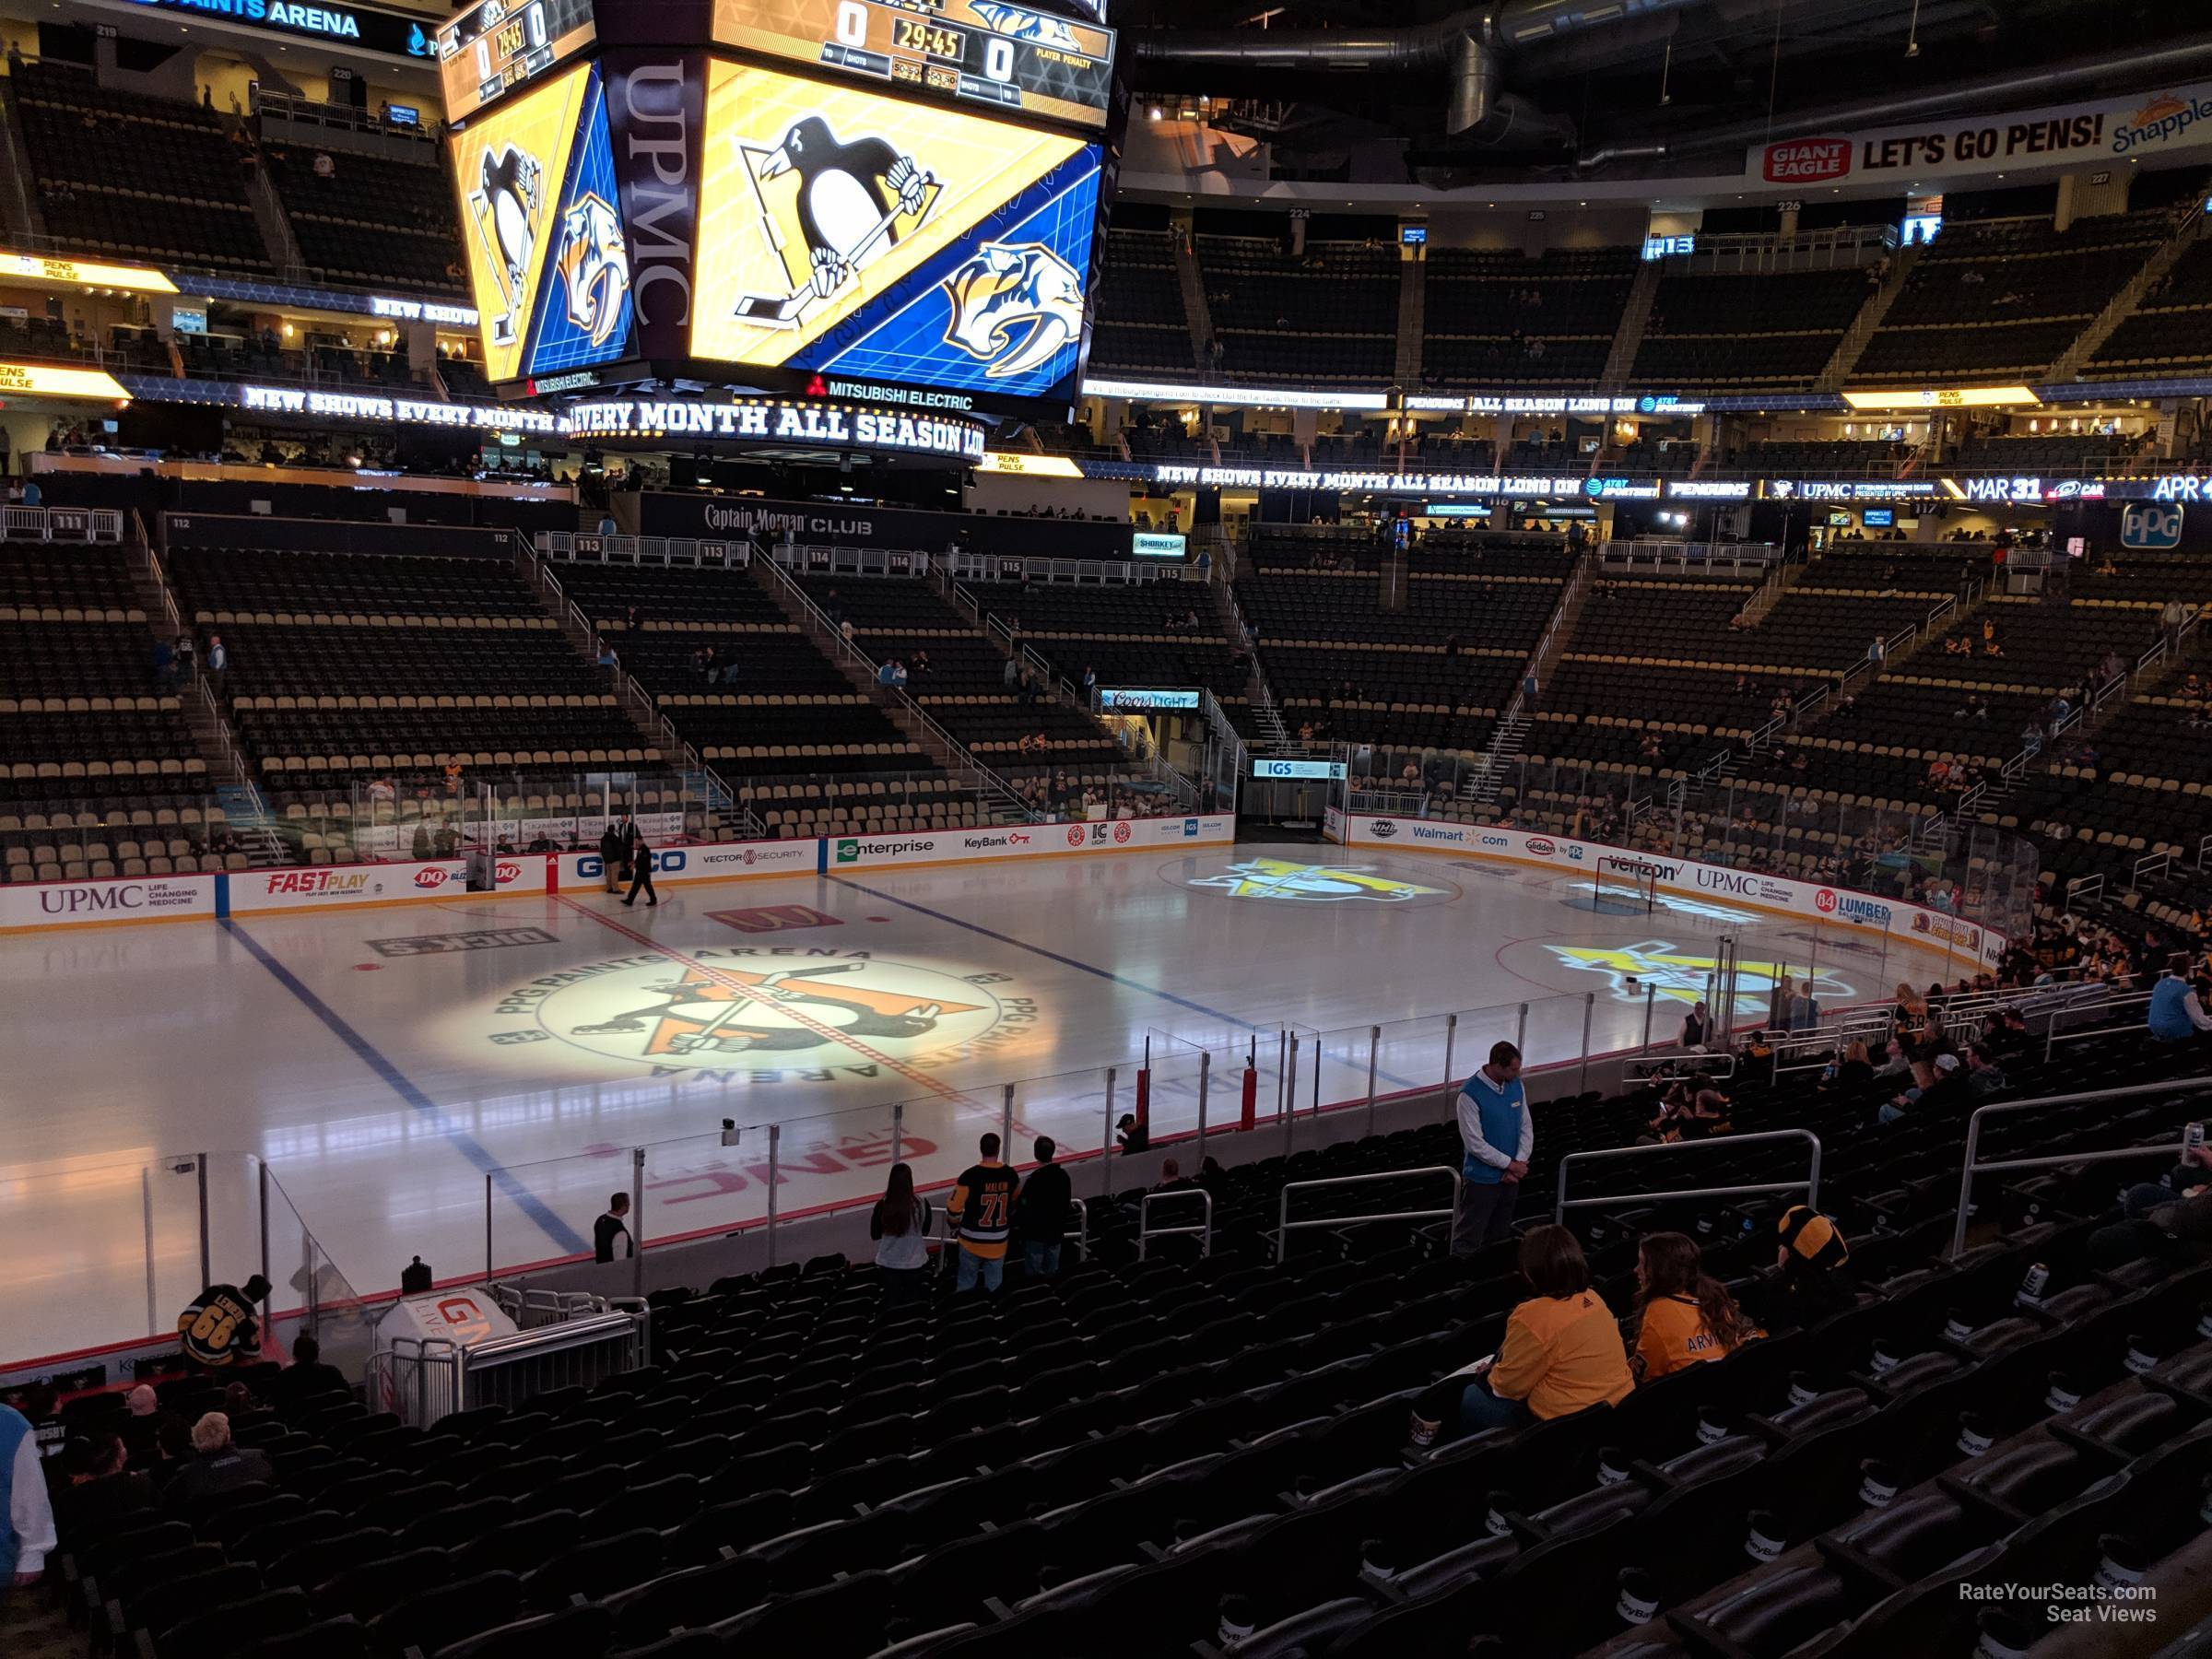 Visiting PPG Paints Arena (Pittsburgh) 